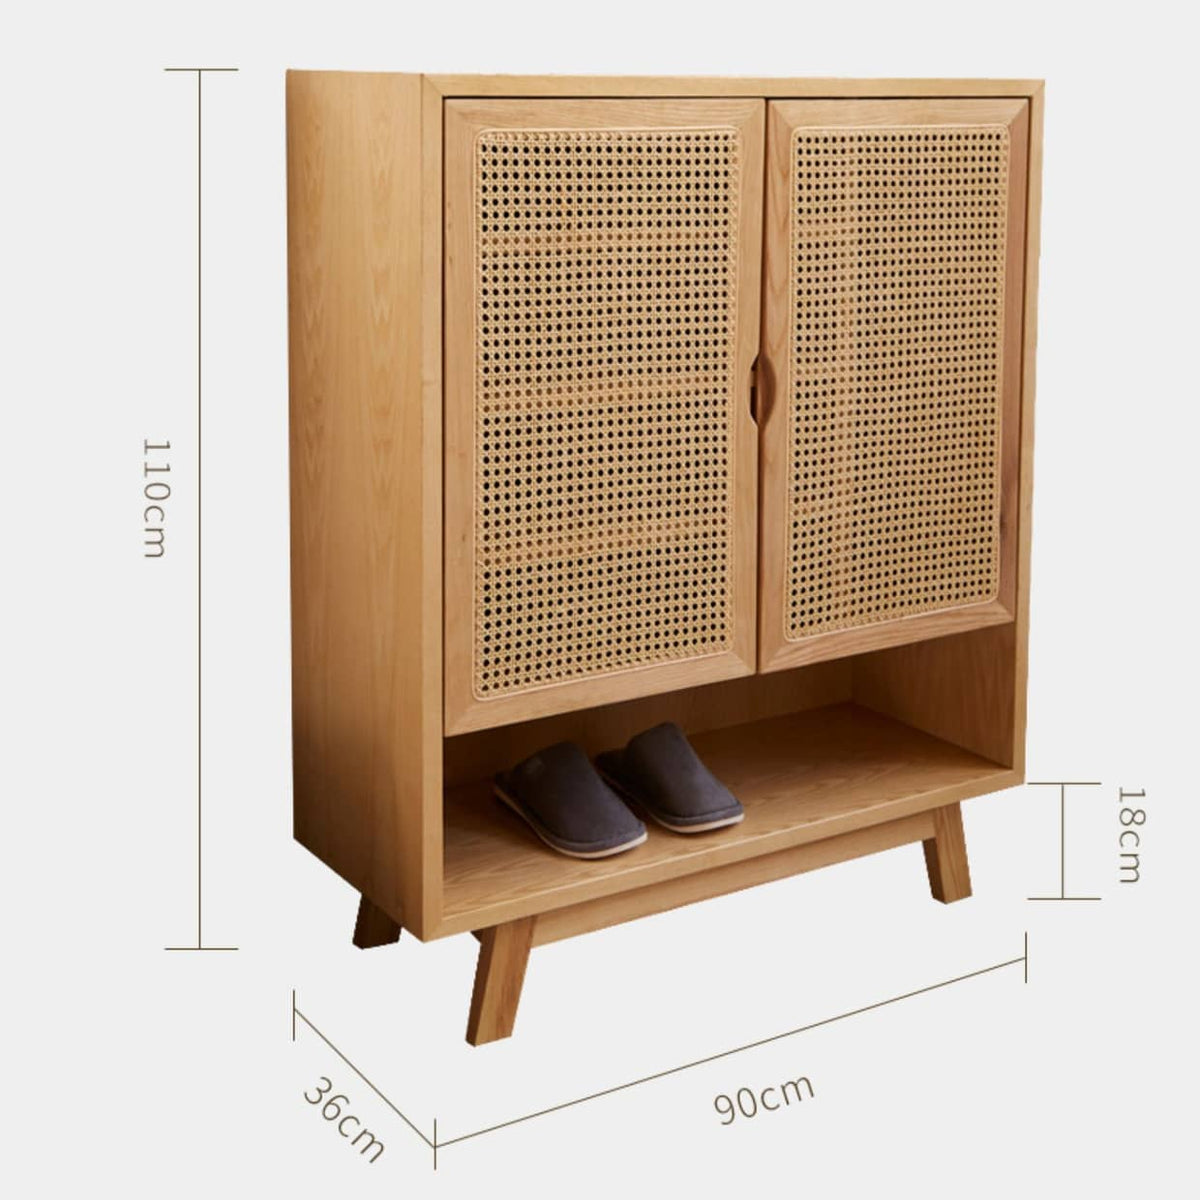 Natural Ash Wood Cabinet with Rattan Accents - Stylish and Durable Storage Solution htzm-1508